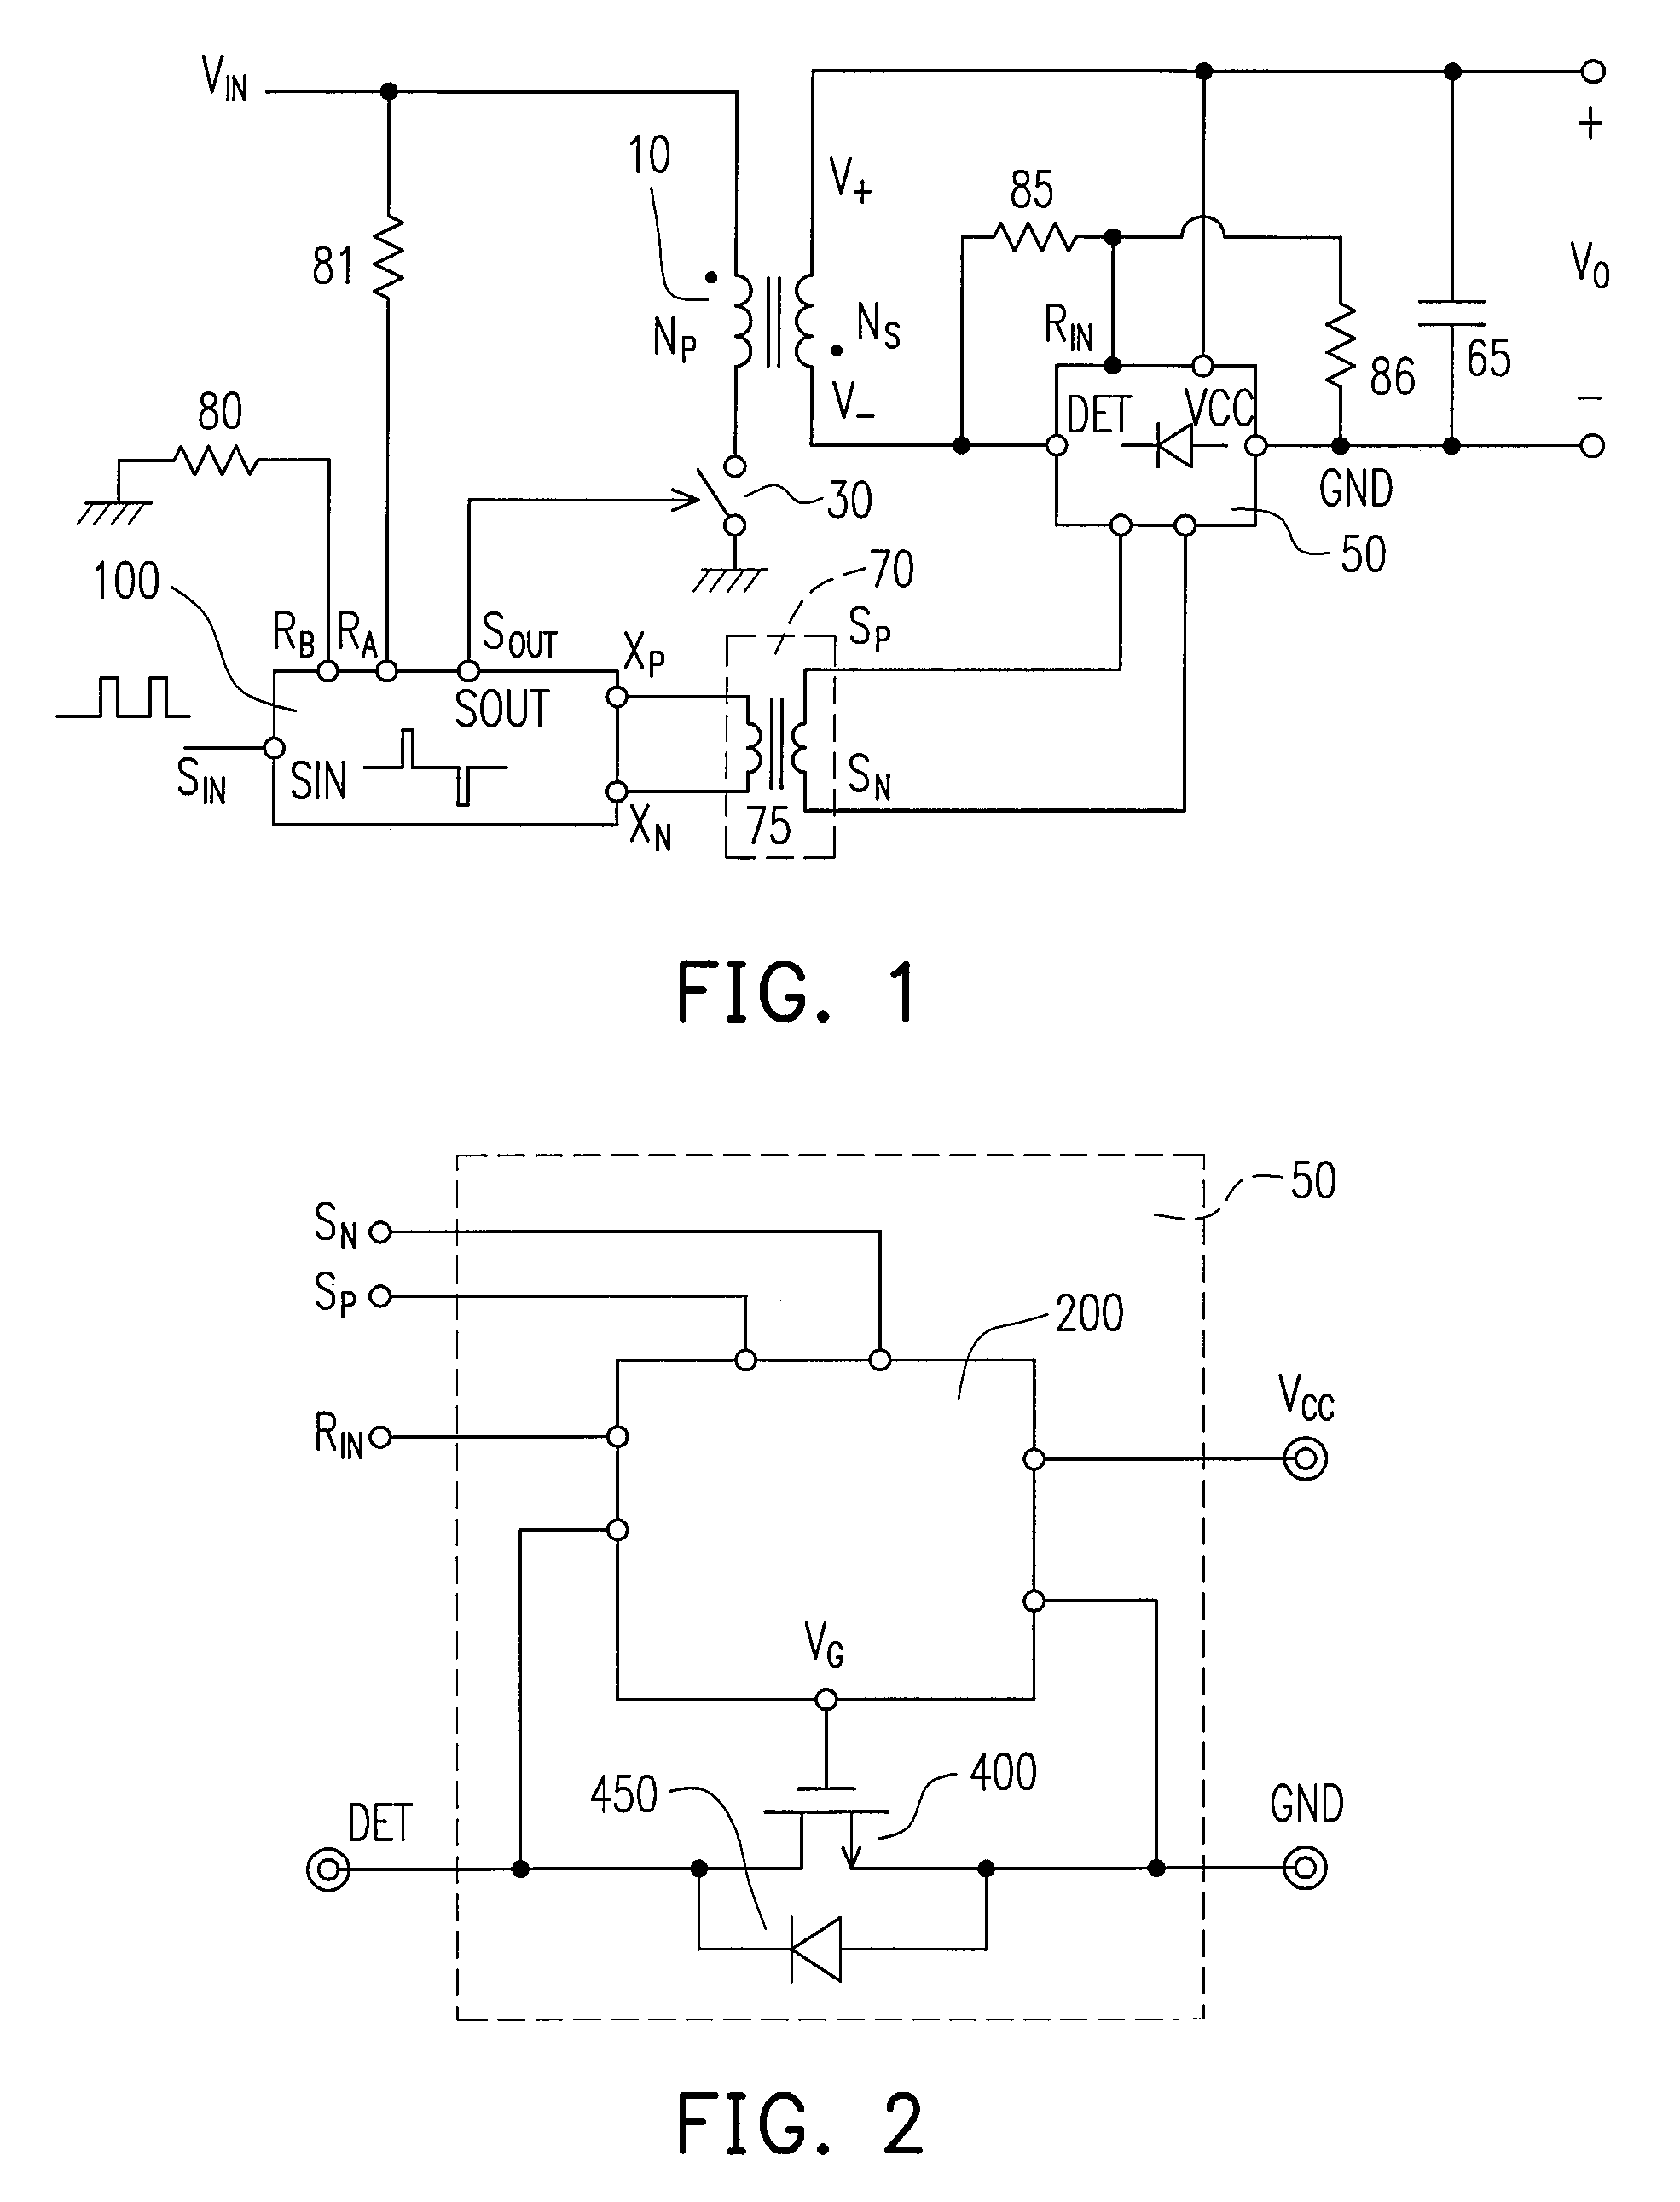 Apparatus to provide synchronous rectifying circuit for flyback power converters